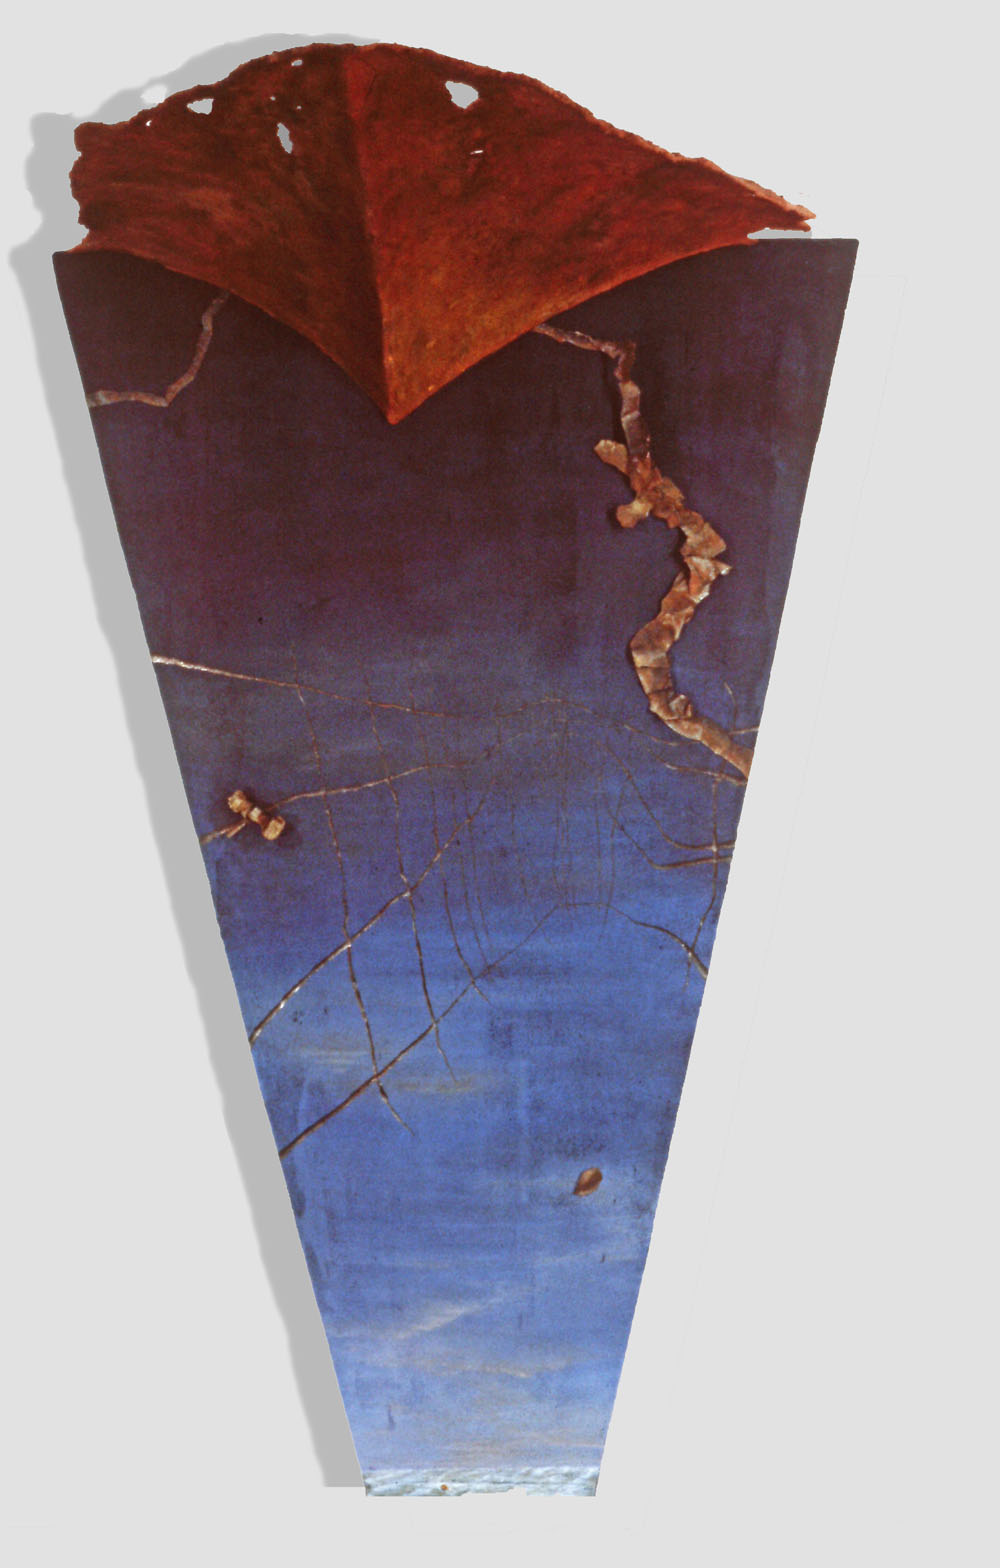    Fall to Drift,  1989, 97” x 59” x 35”, acrylic on cement over wood and metal, painted found objects  